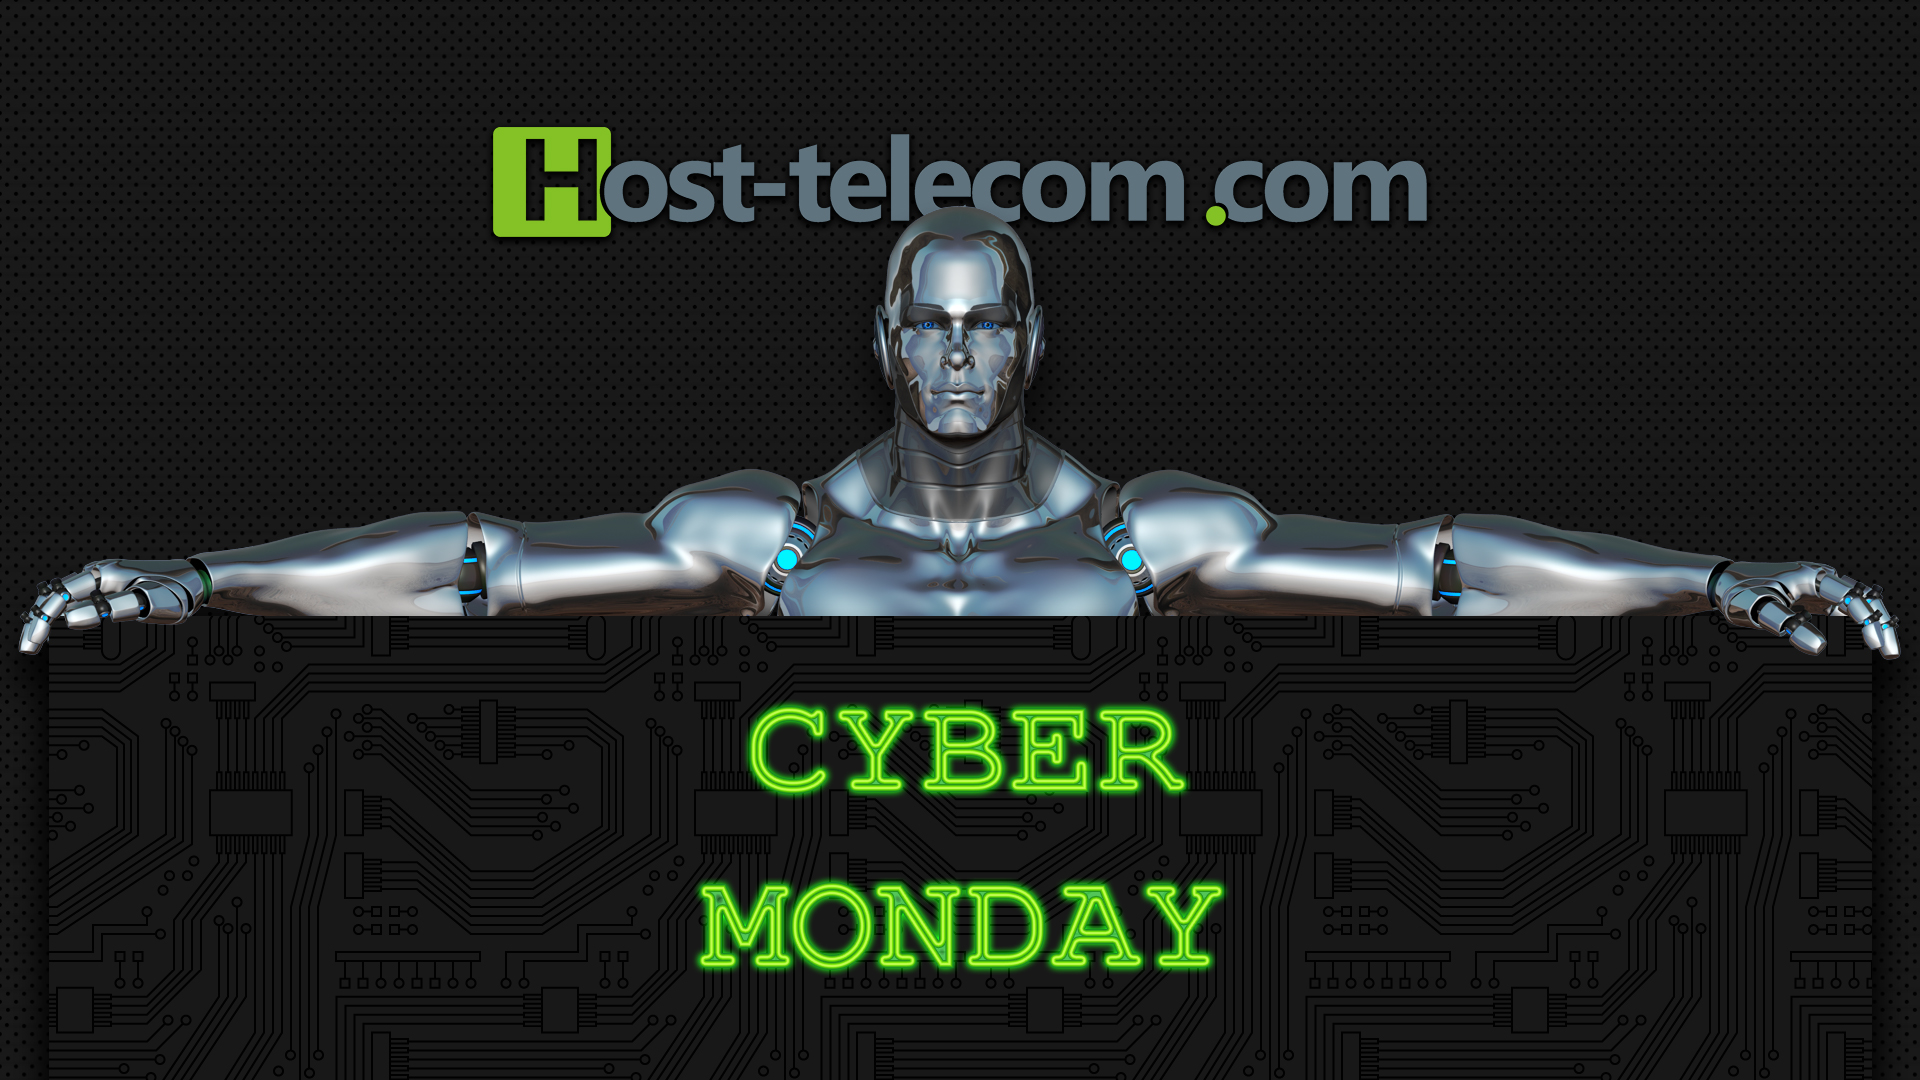 Cyber Monday: if you didn’t have time on Friday…